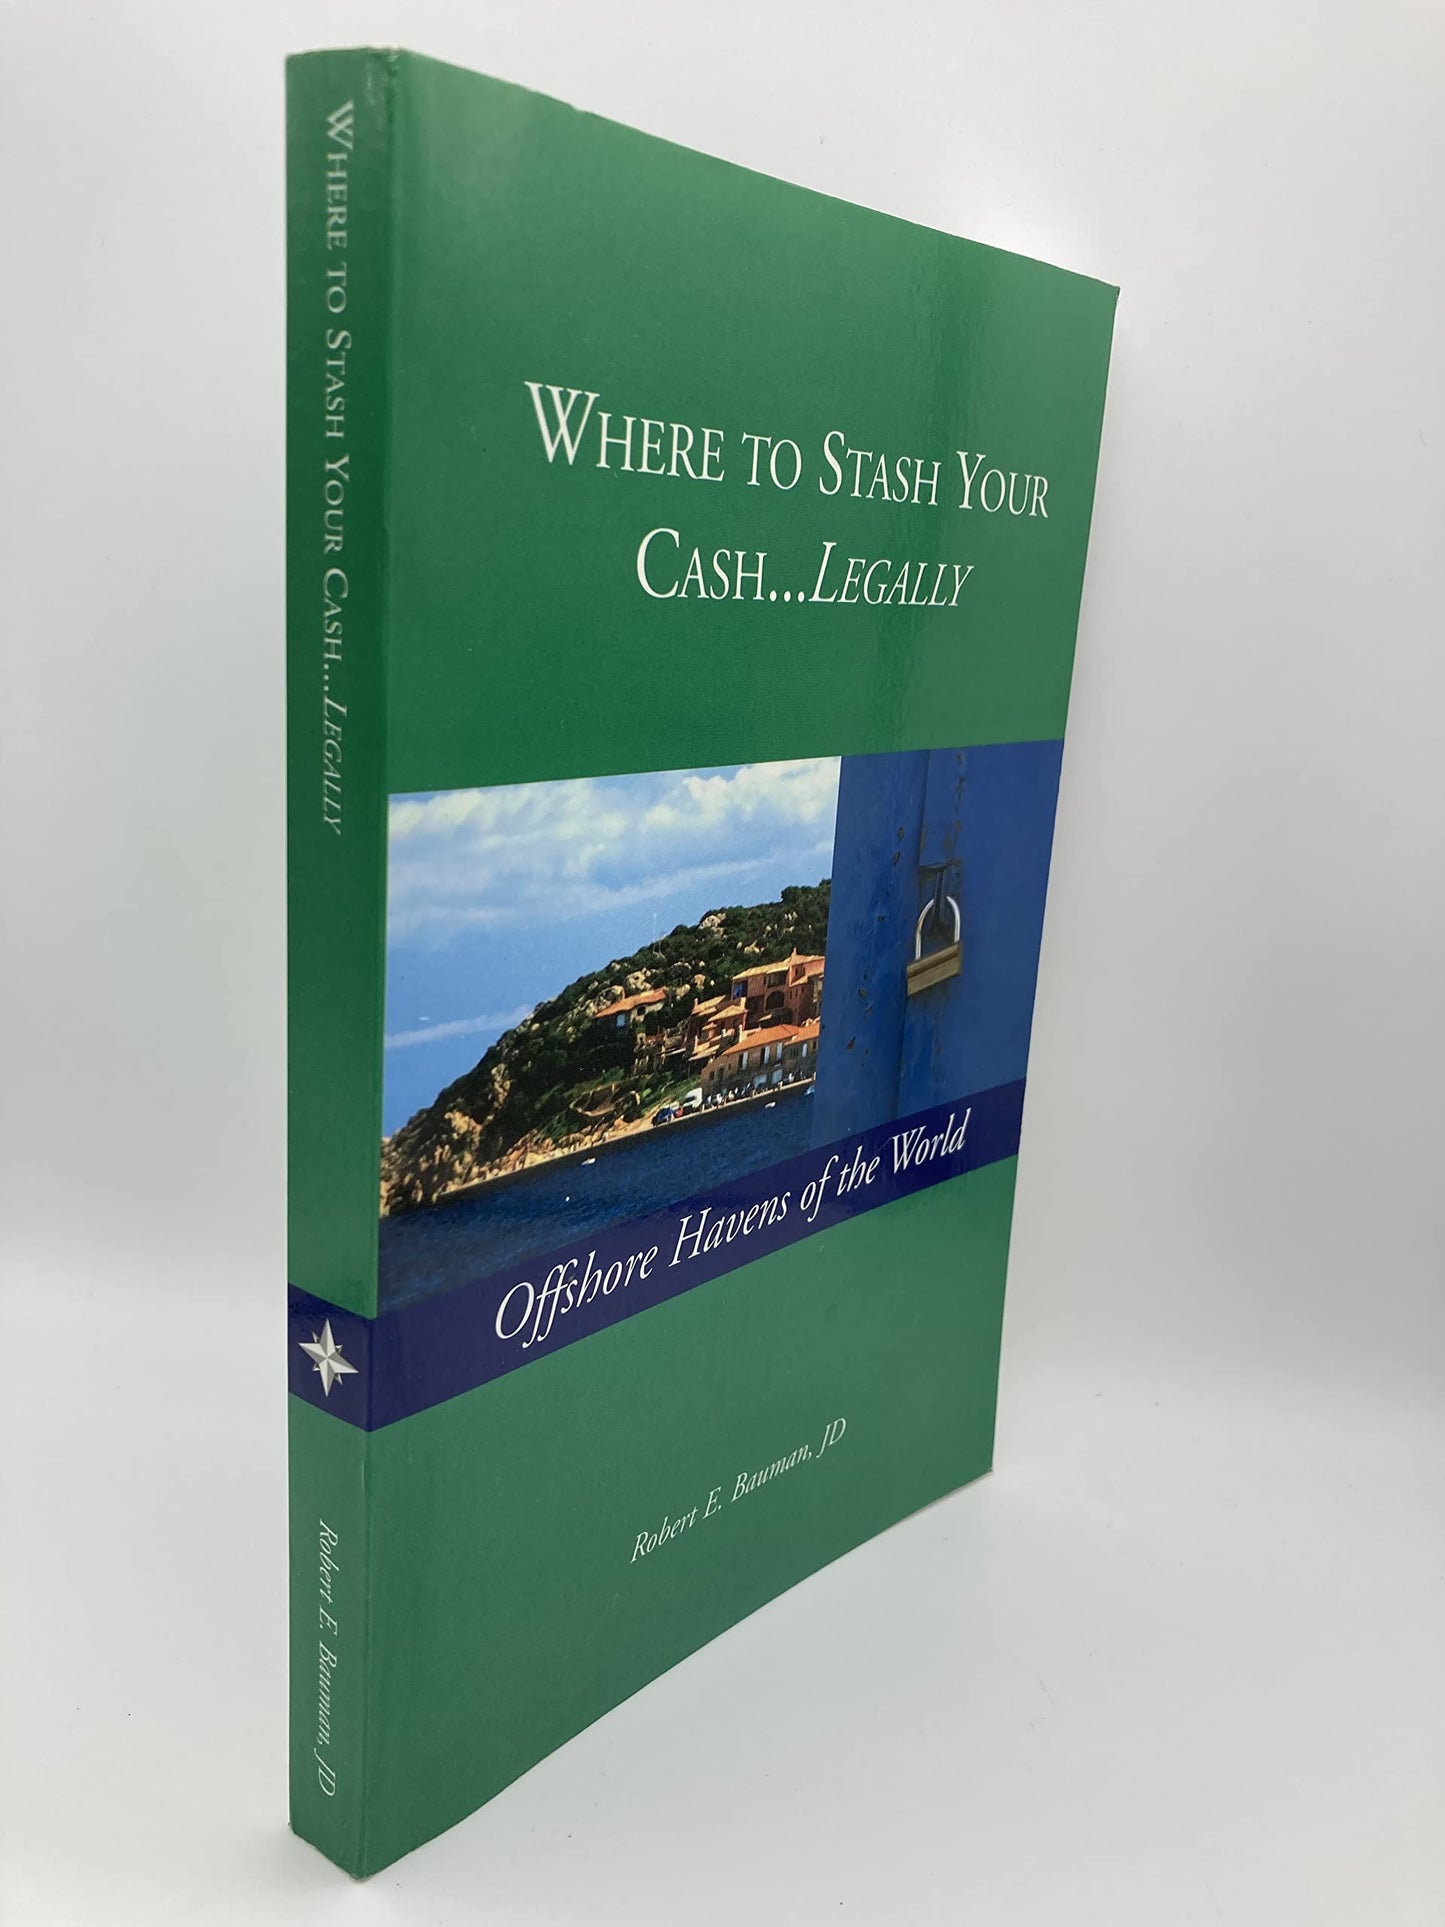 Where to Stash Your Cash...Legally: Offshore Havens of the World